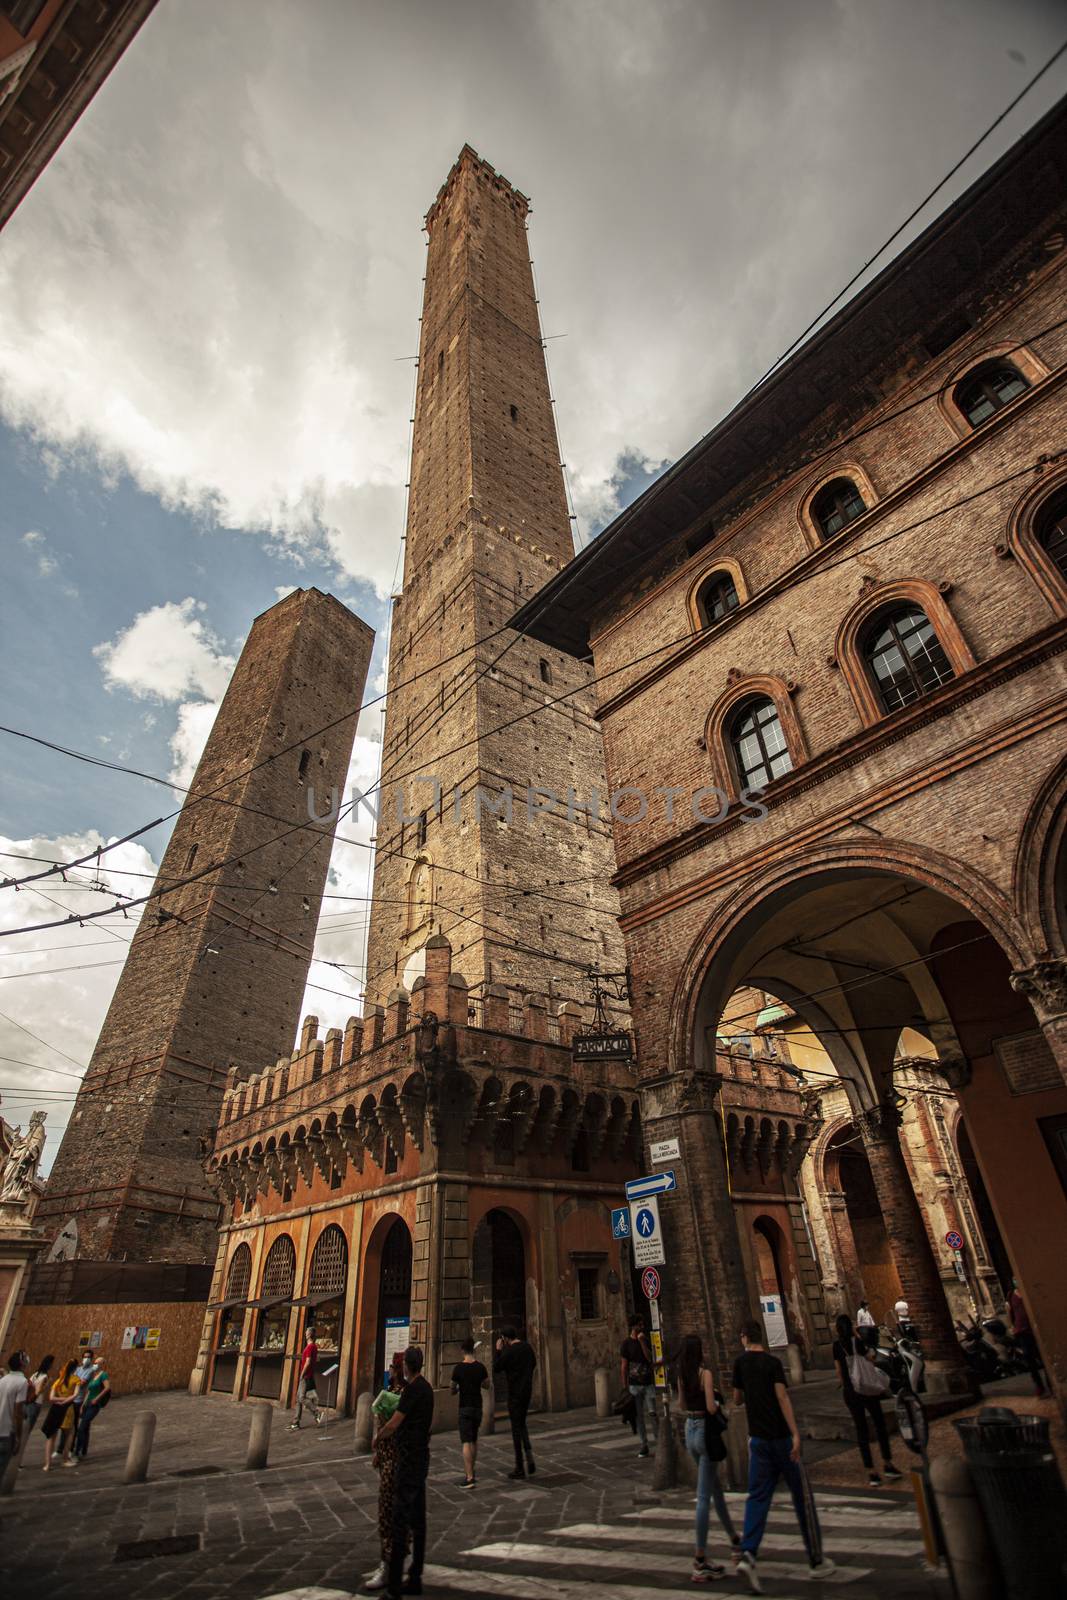 Asinelli tower in Bologna, Italy 11 by pippocarlot